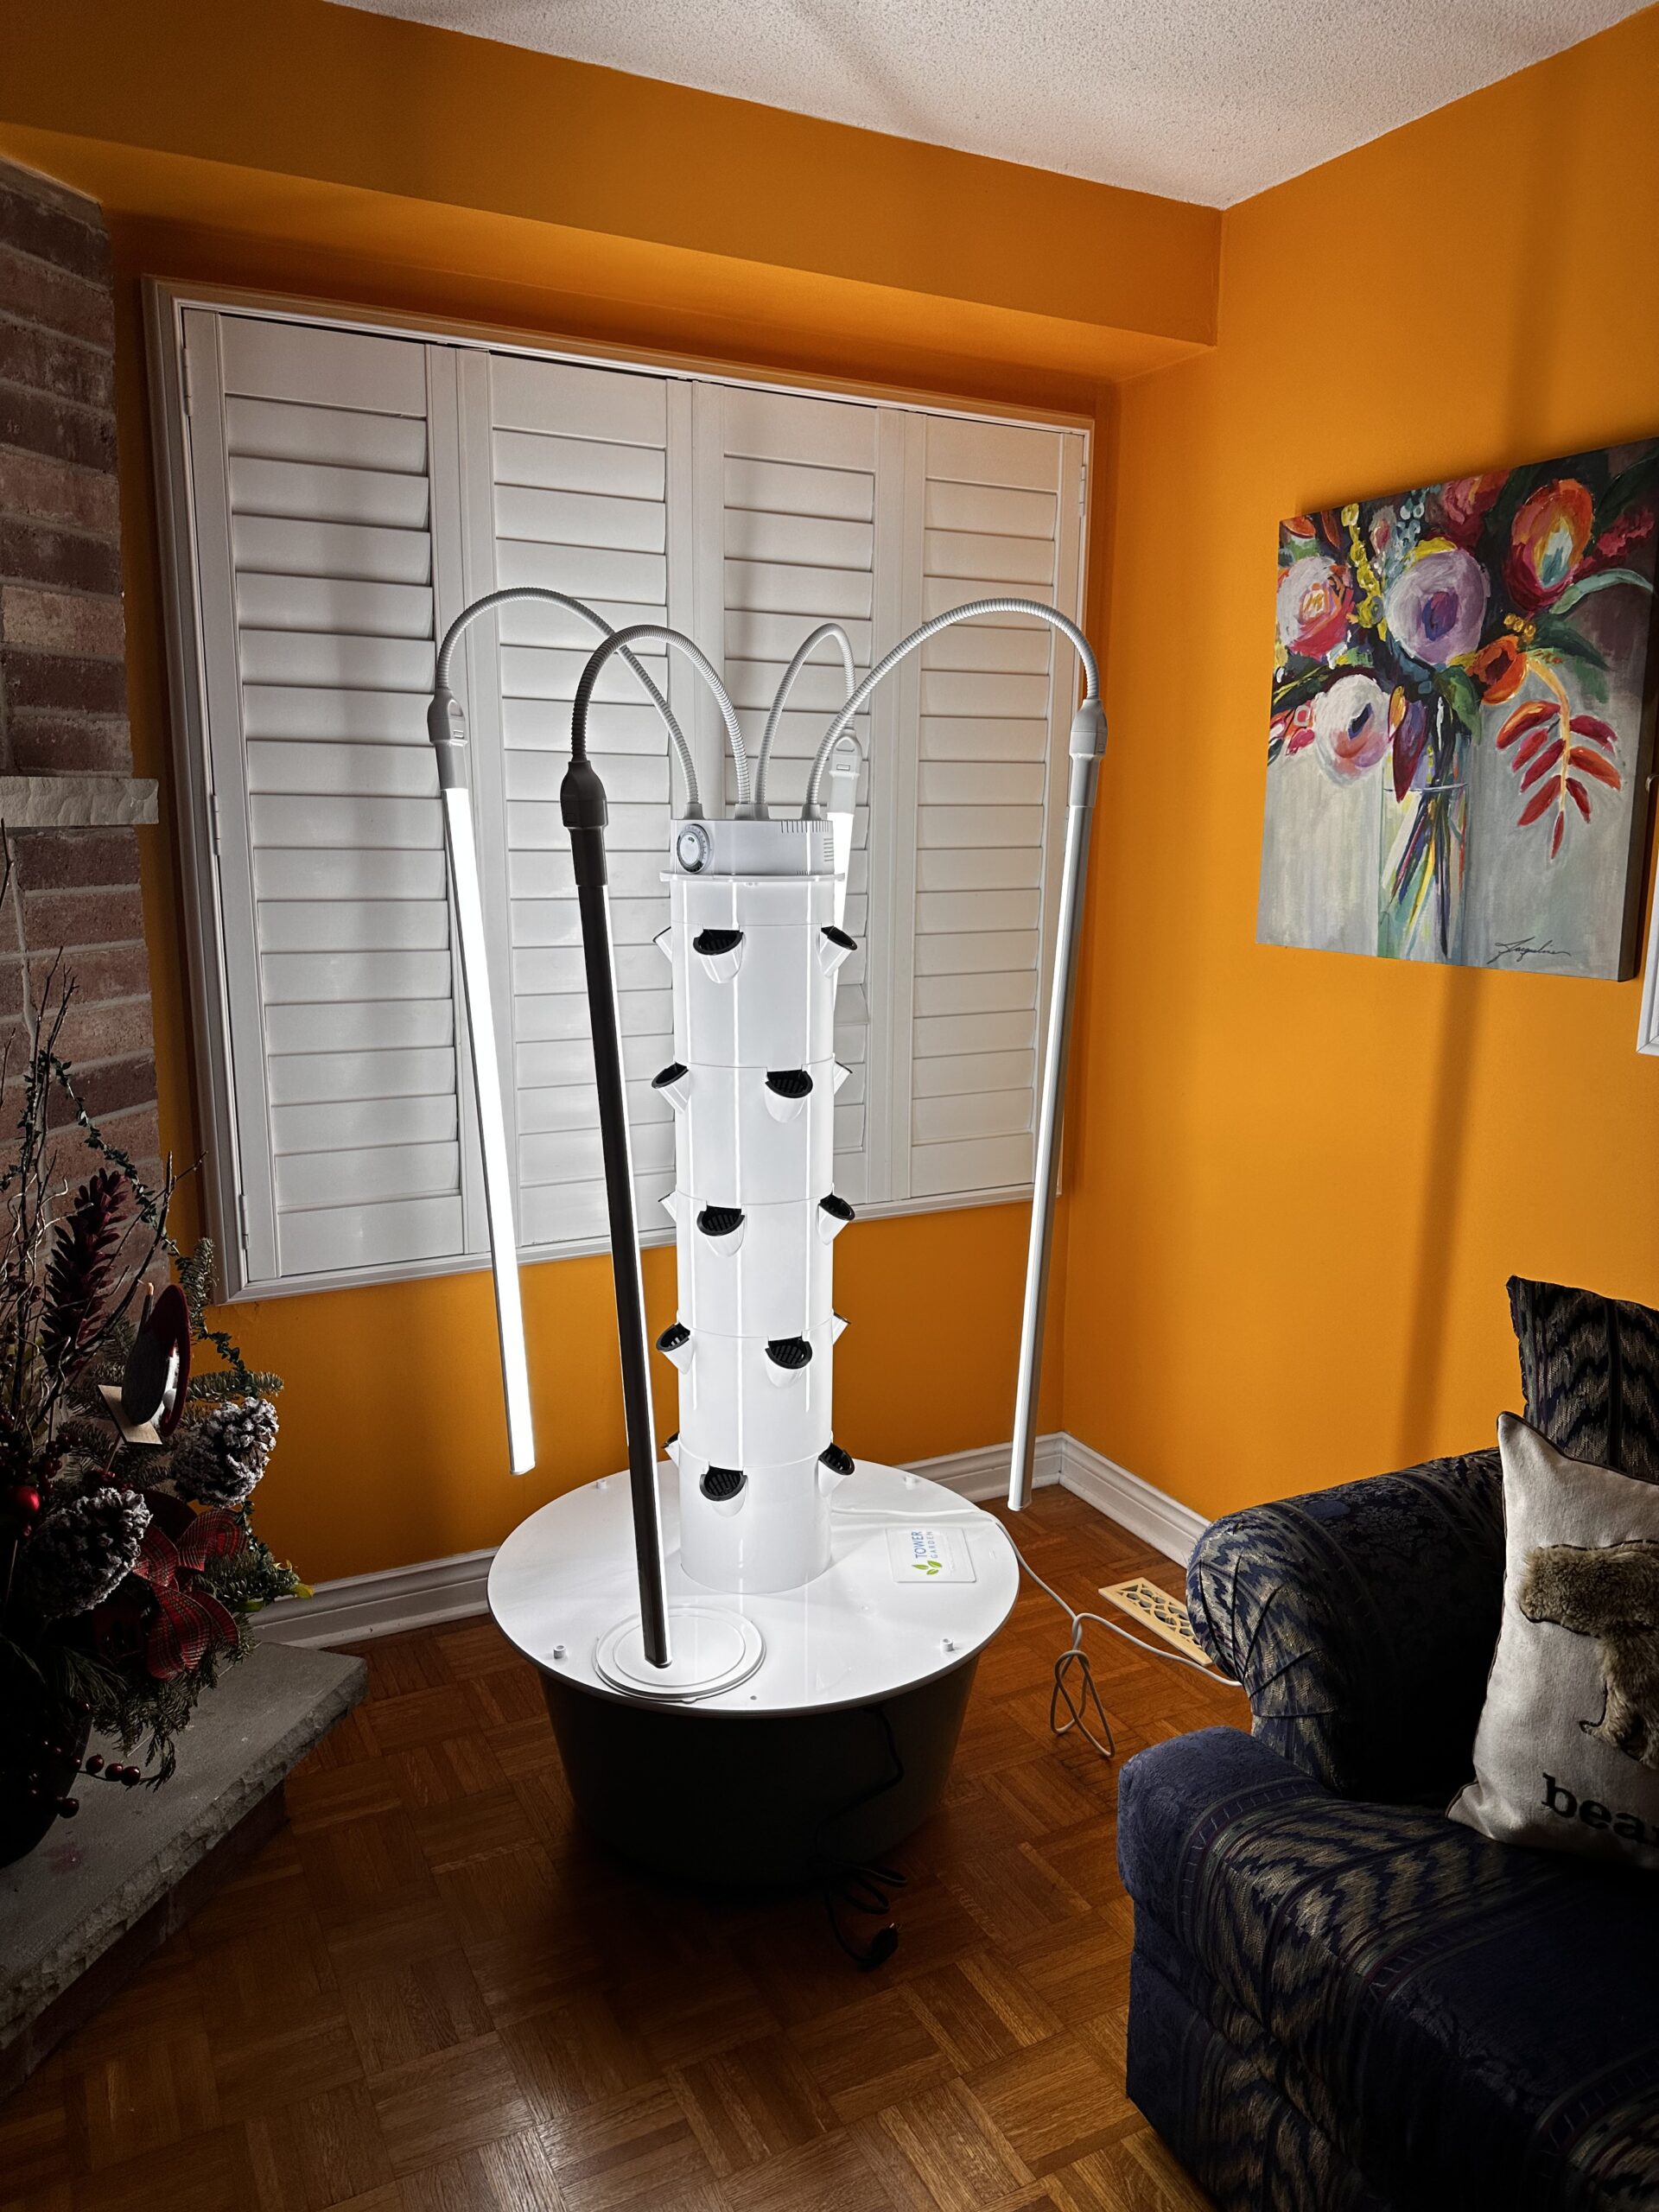 Read more about the article Tower Garden Review : In-depth look at Tower Gardens